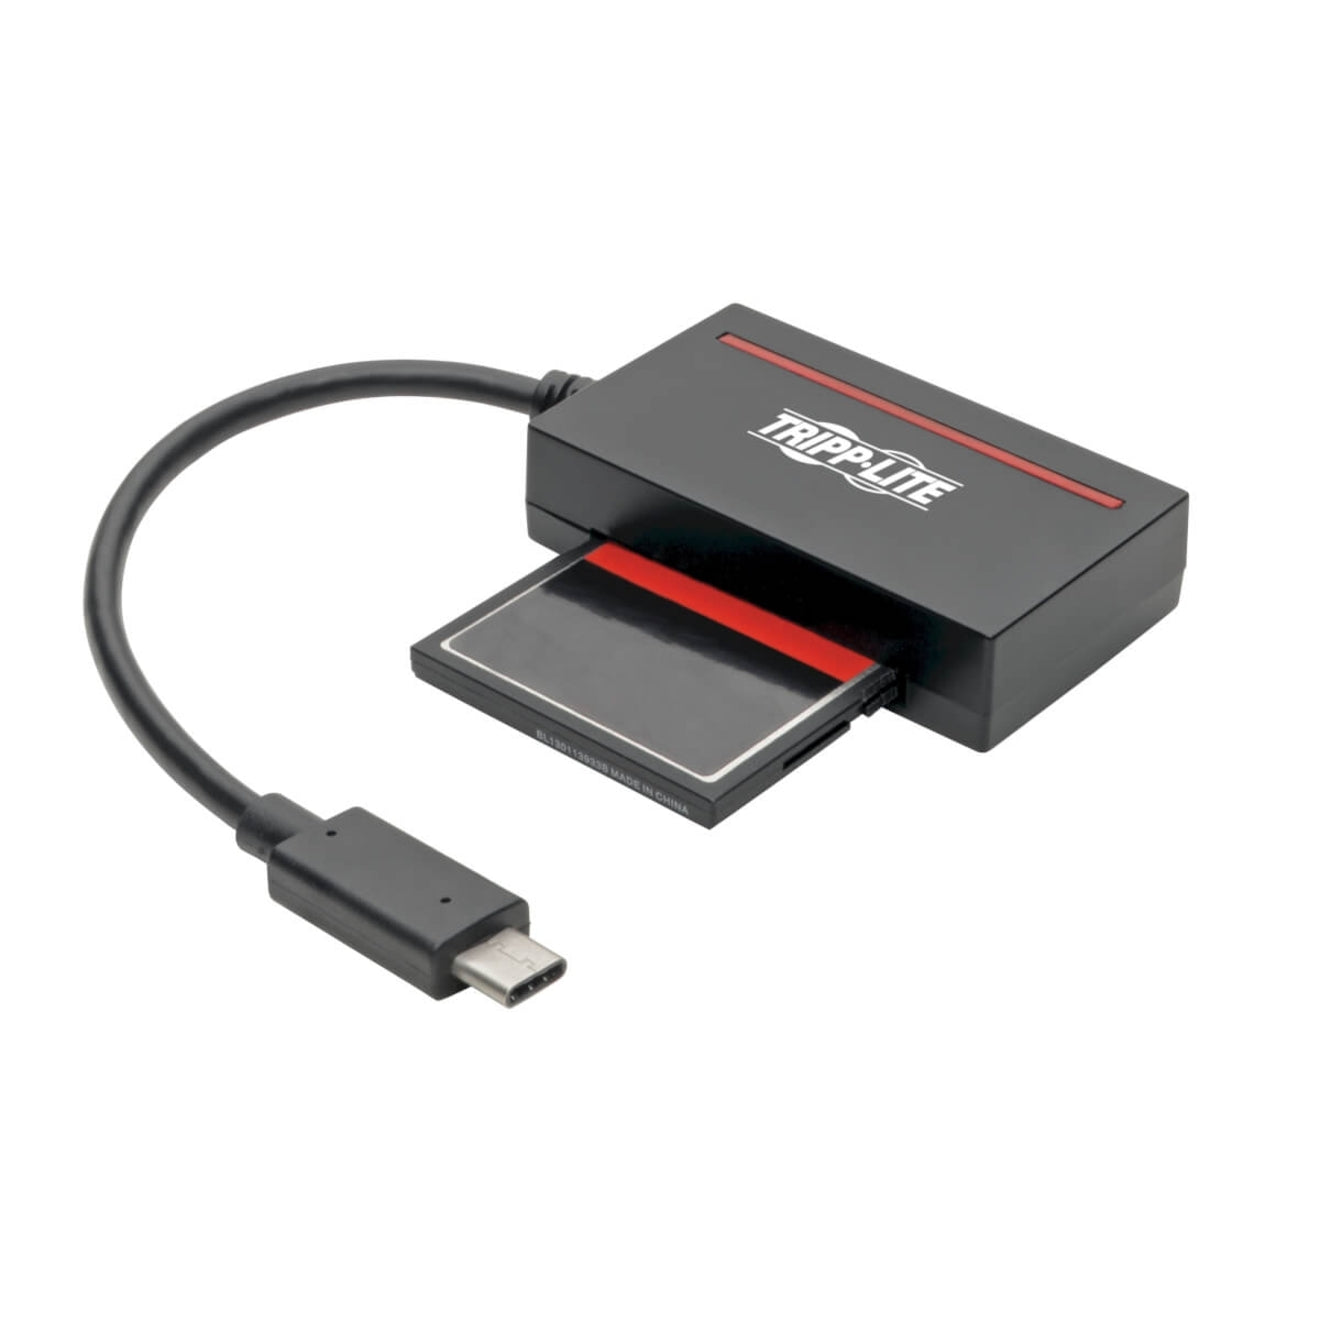 Tripp Lite USB 3.1 Gen 1 (5 Gbps) USB-C to CFast 2.0 Card and SATA III Adapter Thunderbolt 3 compatible